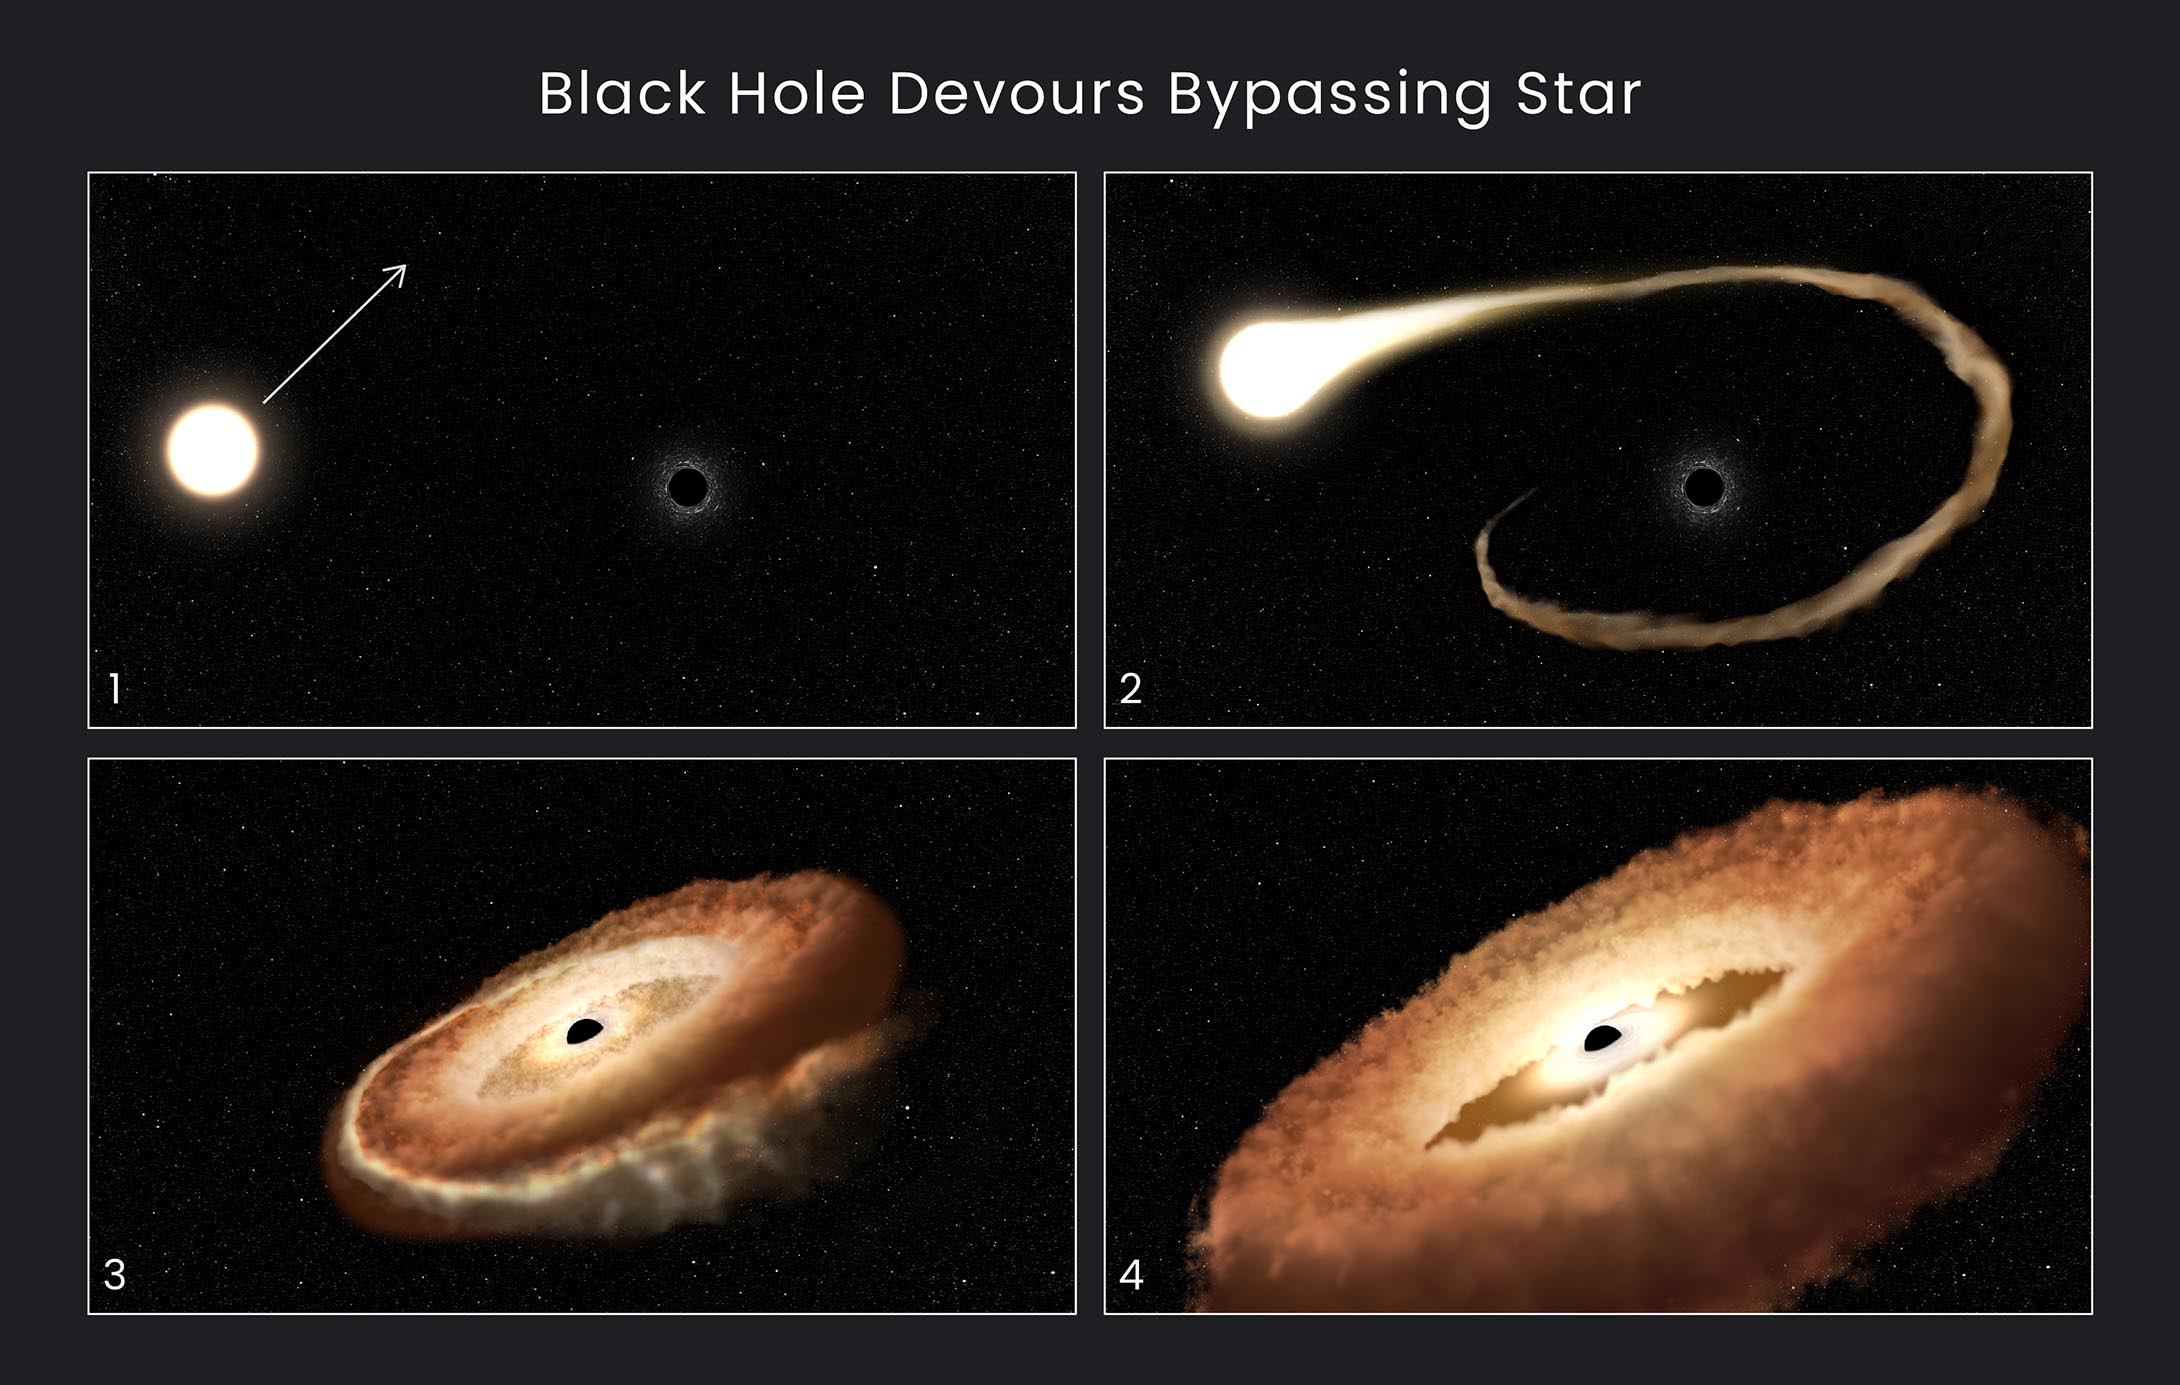 Four-panel illustration titled "Black Hole Devours Bypassing Star" showing all four illustrations are on black background of space. (1) Glowing white sphere representing the star on the left. Smaller black sphere representing the black hole on the right. Black hole is surrounded by faint white arcs. Arrow at the top right of the star points toward 2 o’clock. (2) Top right portion of the star stretches out to form a wispy brown tail winding clockwise around the black hole. (3) The black hole is surrounded by an opaque disk-shaped cloud of orange-brown bands of material spiraling in clockwise. Outer portion of the disk is much thicker than the inner portion. Material near the black hole appears to be glowing. There is no sign of the original star. (4) Similar to panel 3, but disk has expanded laterally. Coloring is more homogeneous and distinct spiral bands are no longer visible. Central part of the disk mostly cleared out, giving the disk a donut shape. Material near the black hole is glowing brightly.